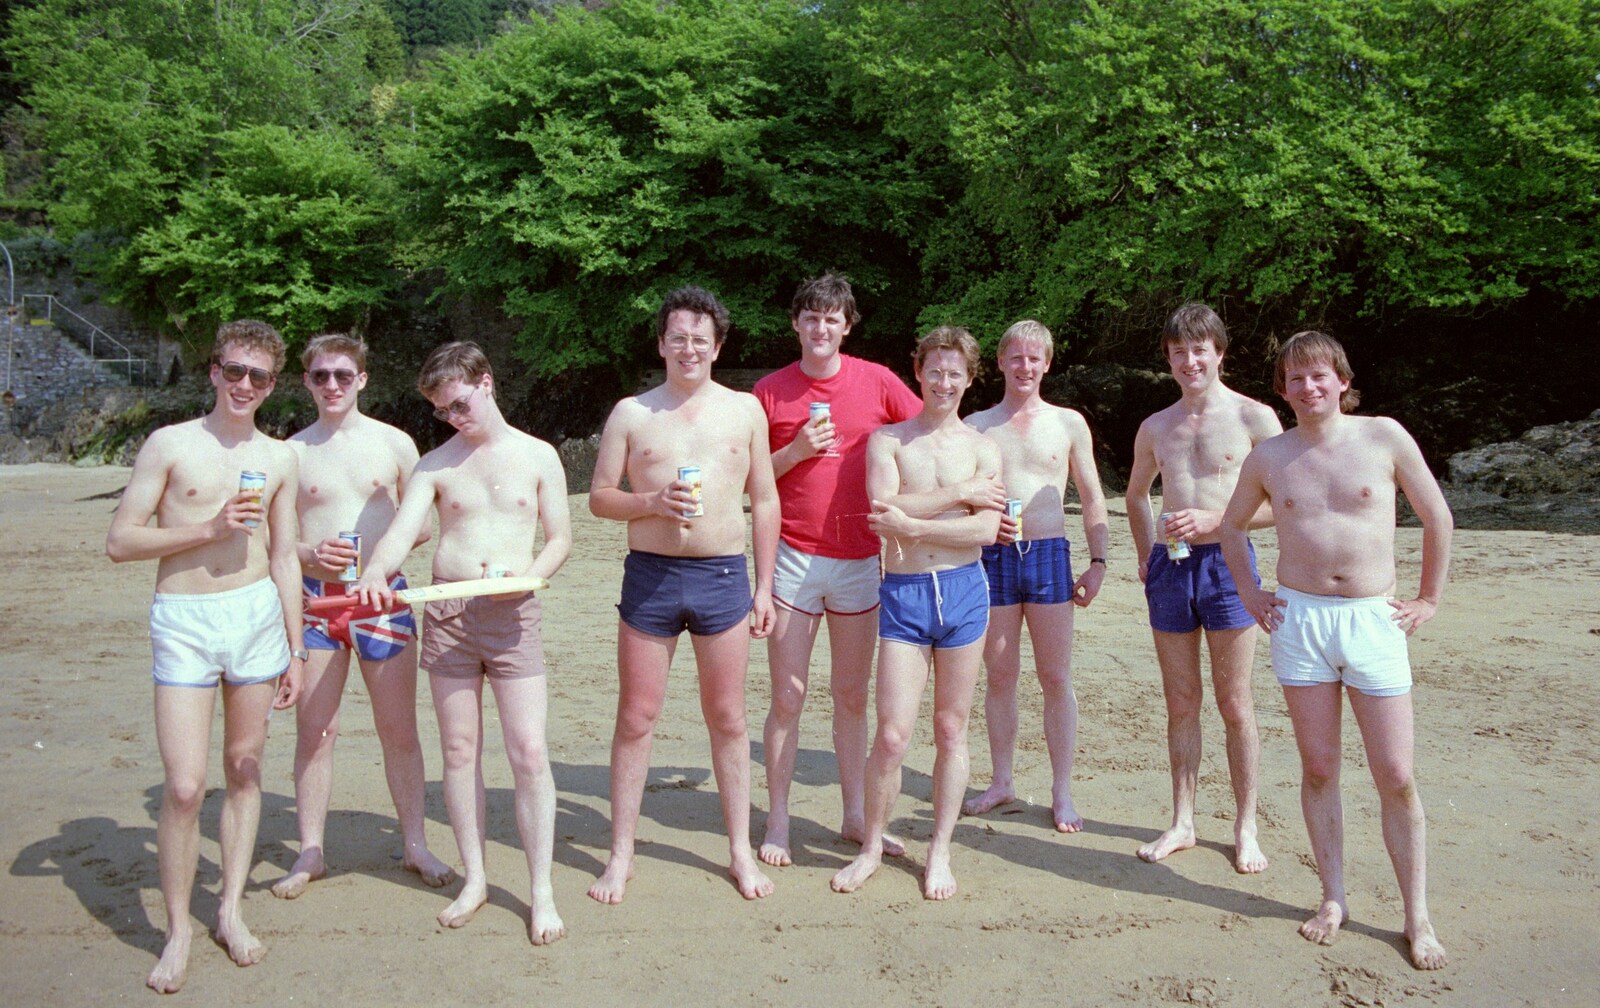 A post-game group photo from Uni: Twenty One Guns and Footie on the Beach, Plymouth Hoe and Salcombe, Devon - 15th June 1986